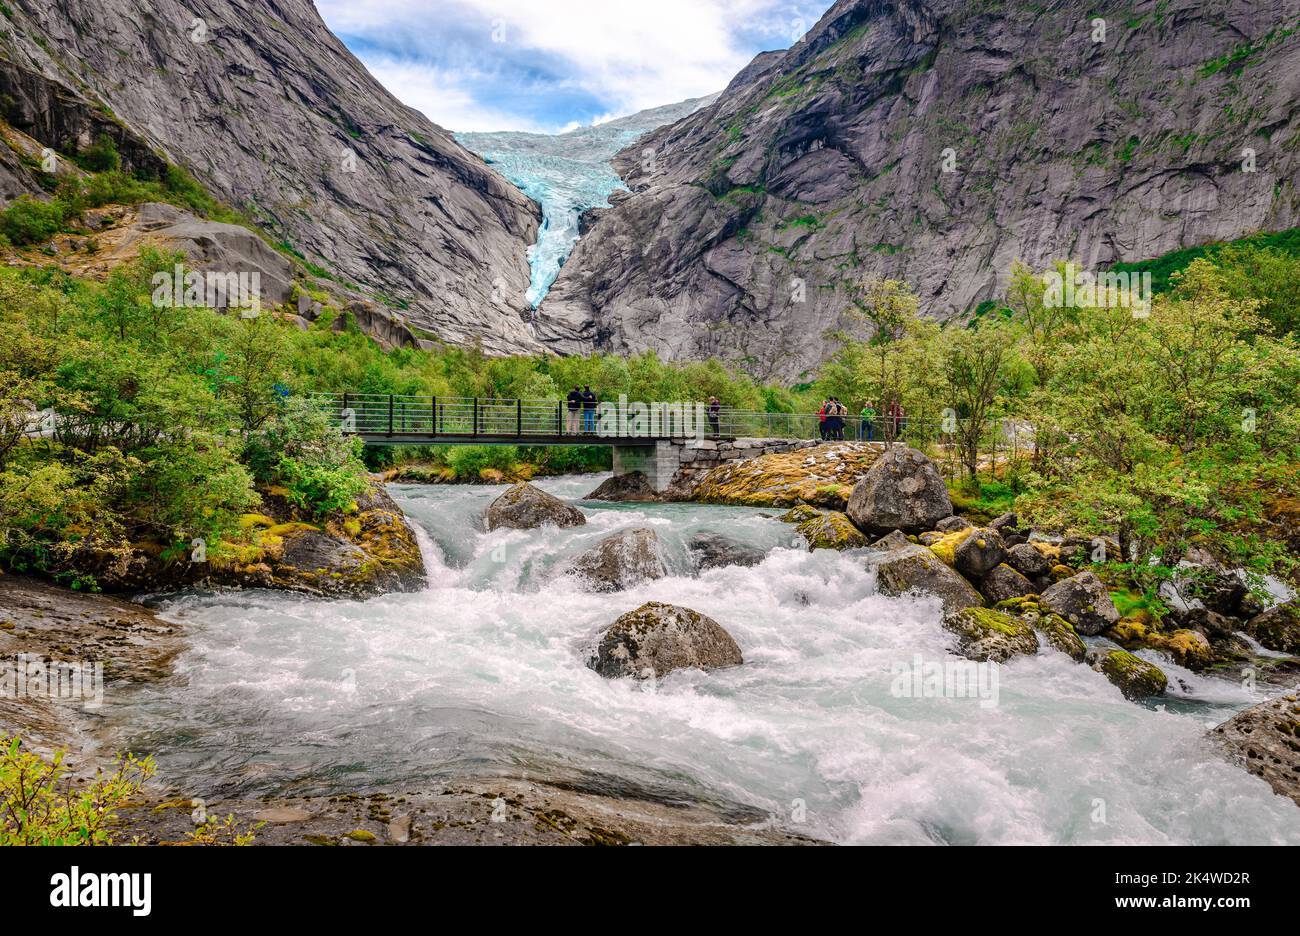 Briksdalen, Norway - August 22 2022: View of Briksdal valley with Briksdalselva (the river) and the Briksdalsbreen (the Glacier) in the background. Pa Stock Photo